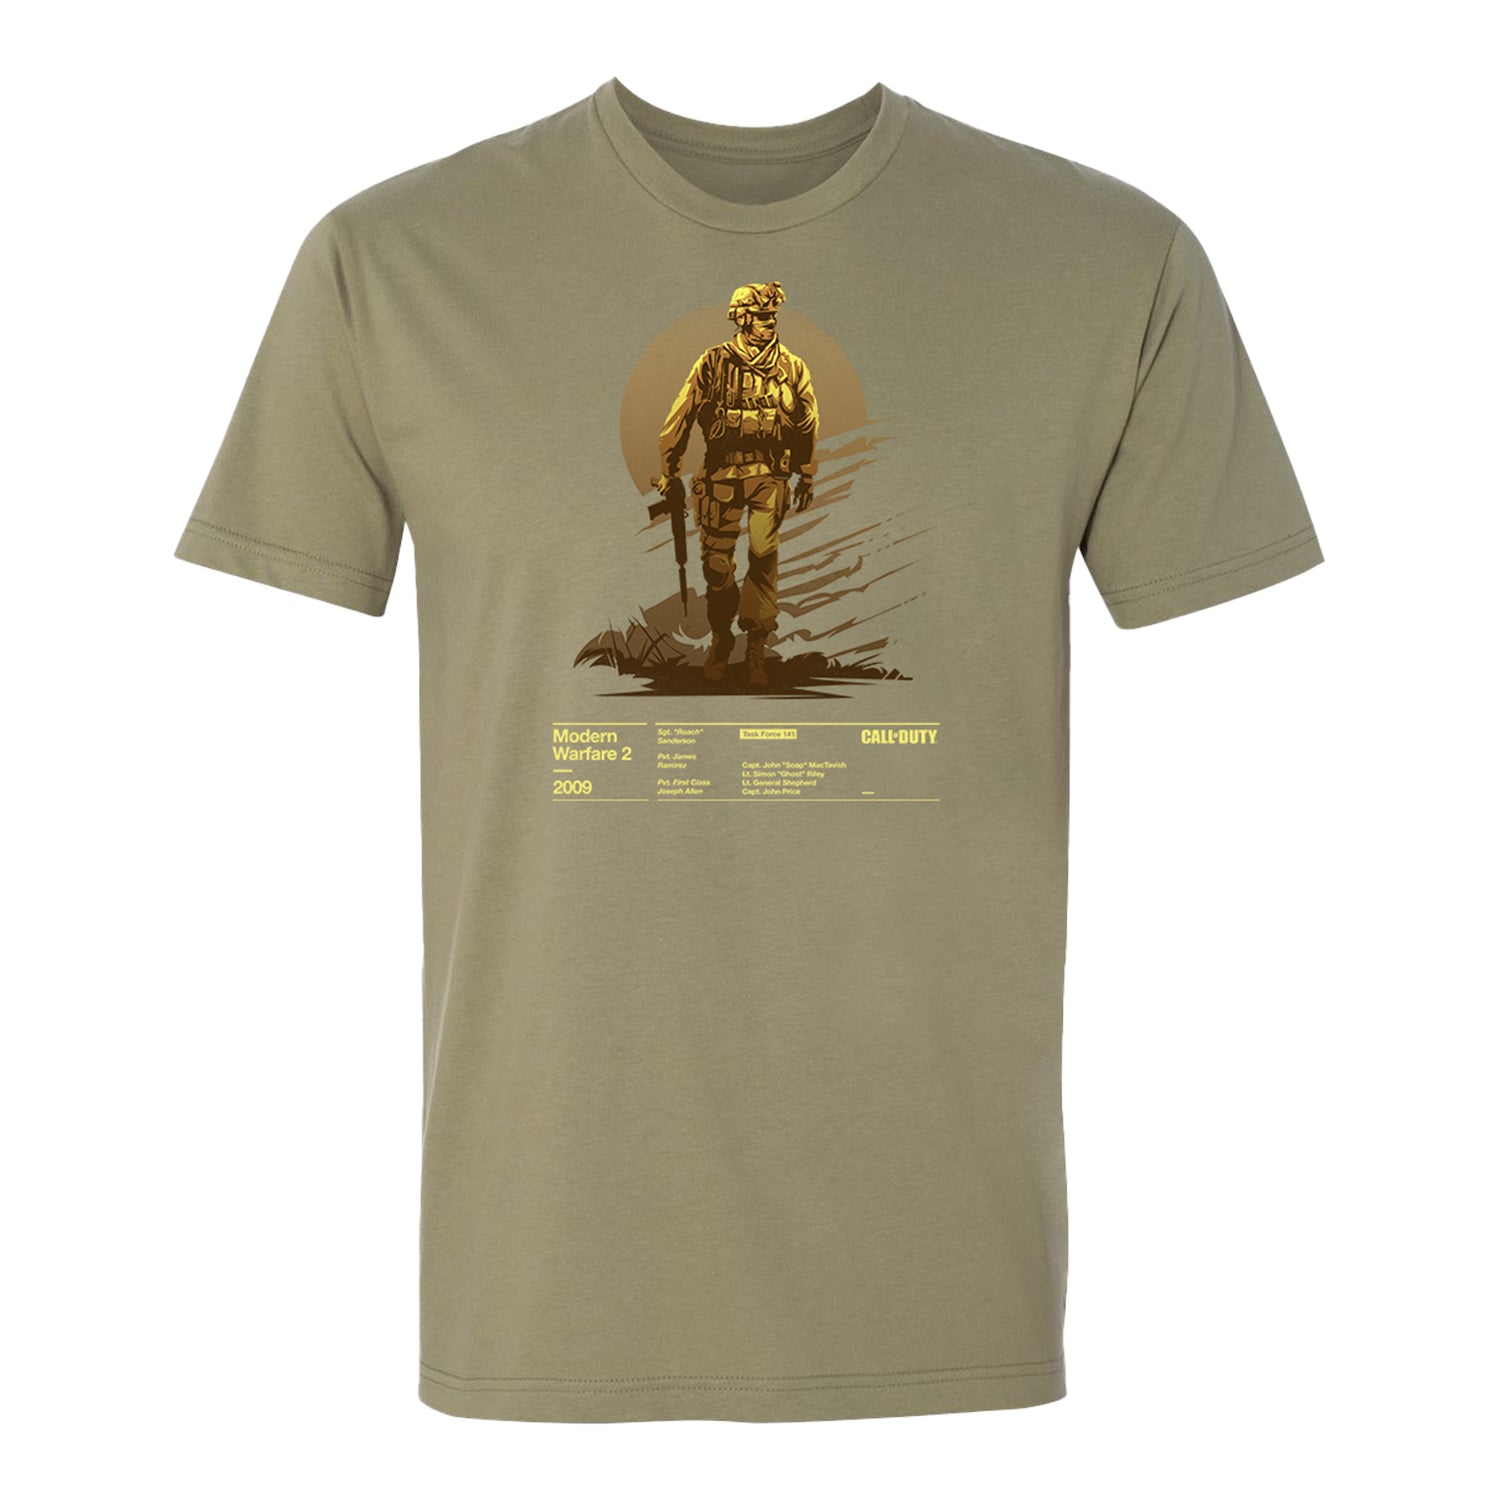 Call of Duty Modern Warfare 2 (2009) T-Shirt - Olive Green Front View